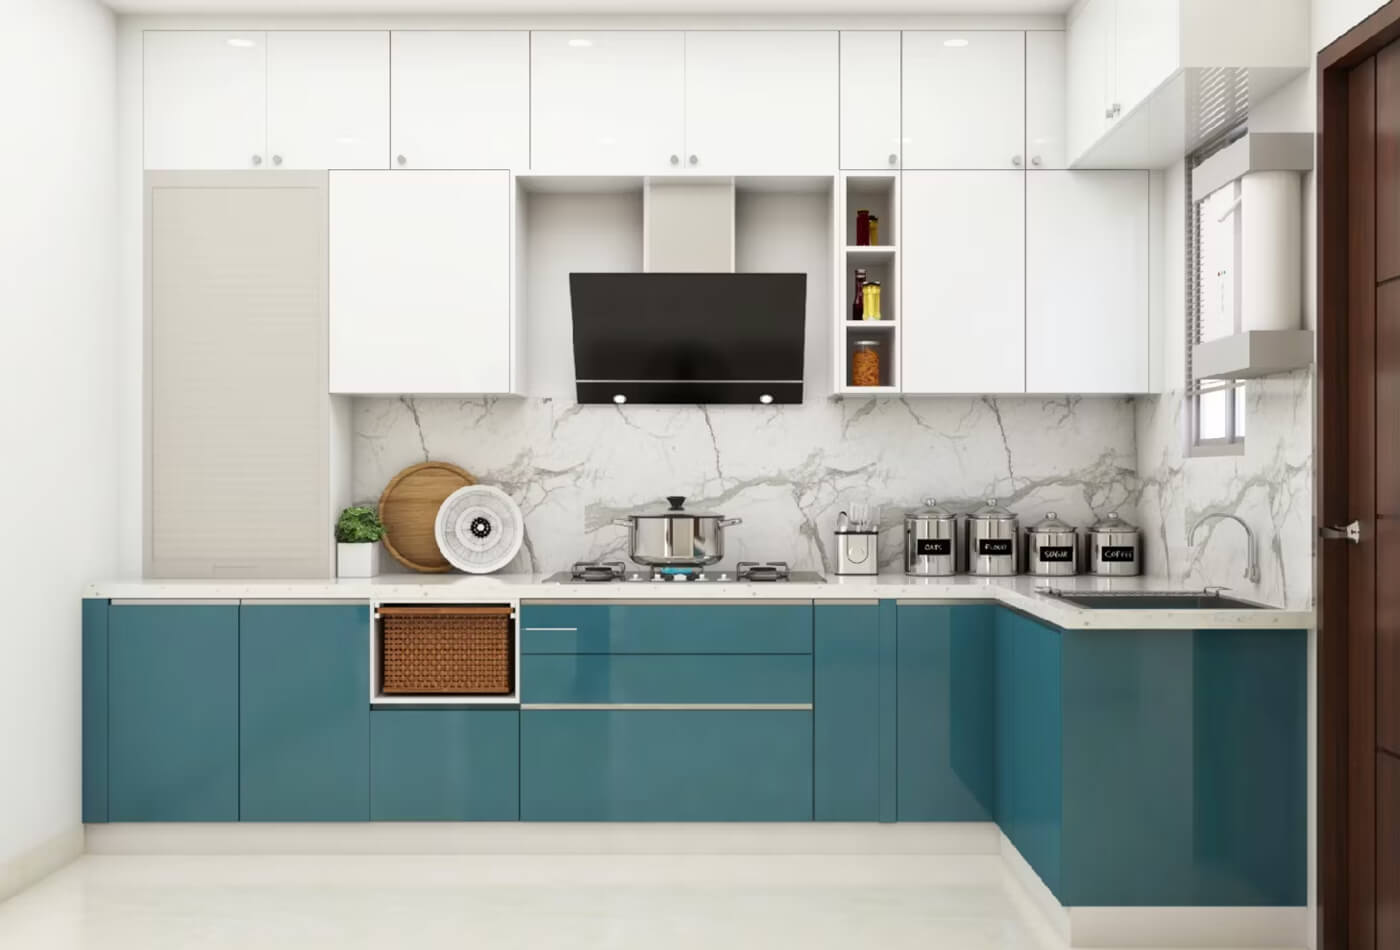 How to Select Your Stones for Your Small Kitchen Cabinets